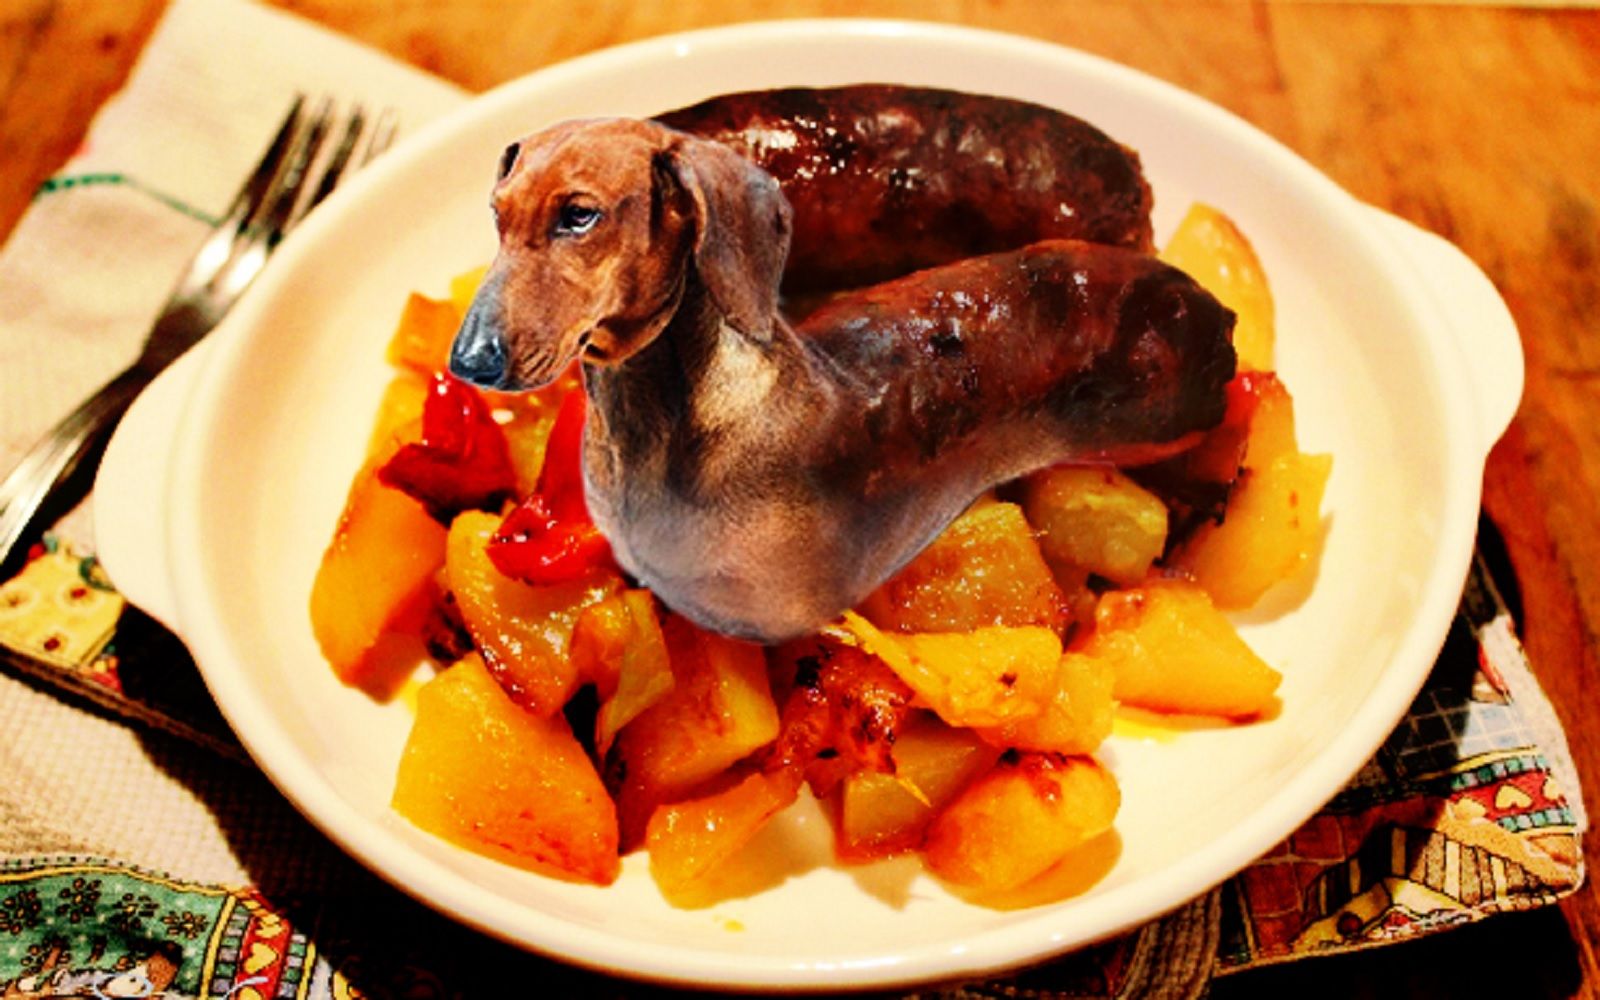 These Photoshop artists have turned pets into delicious foodstuffs photo 11